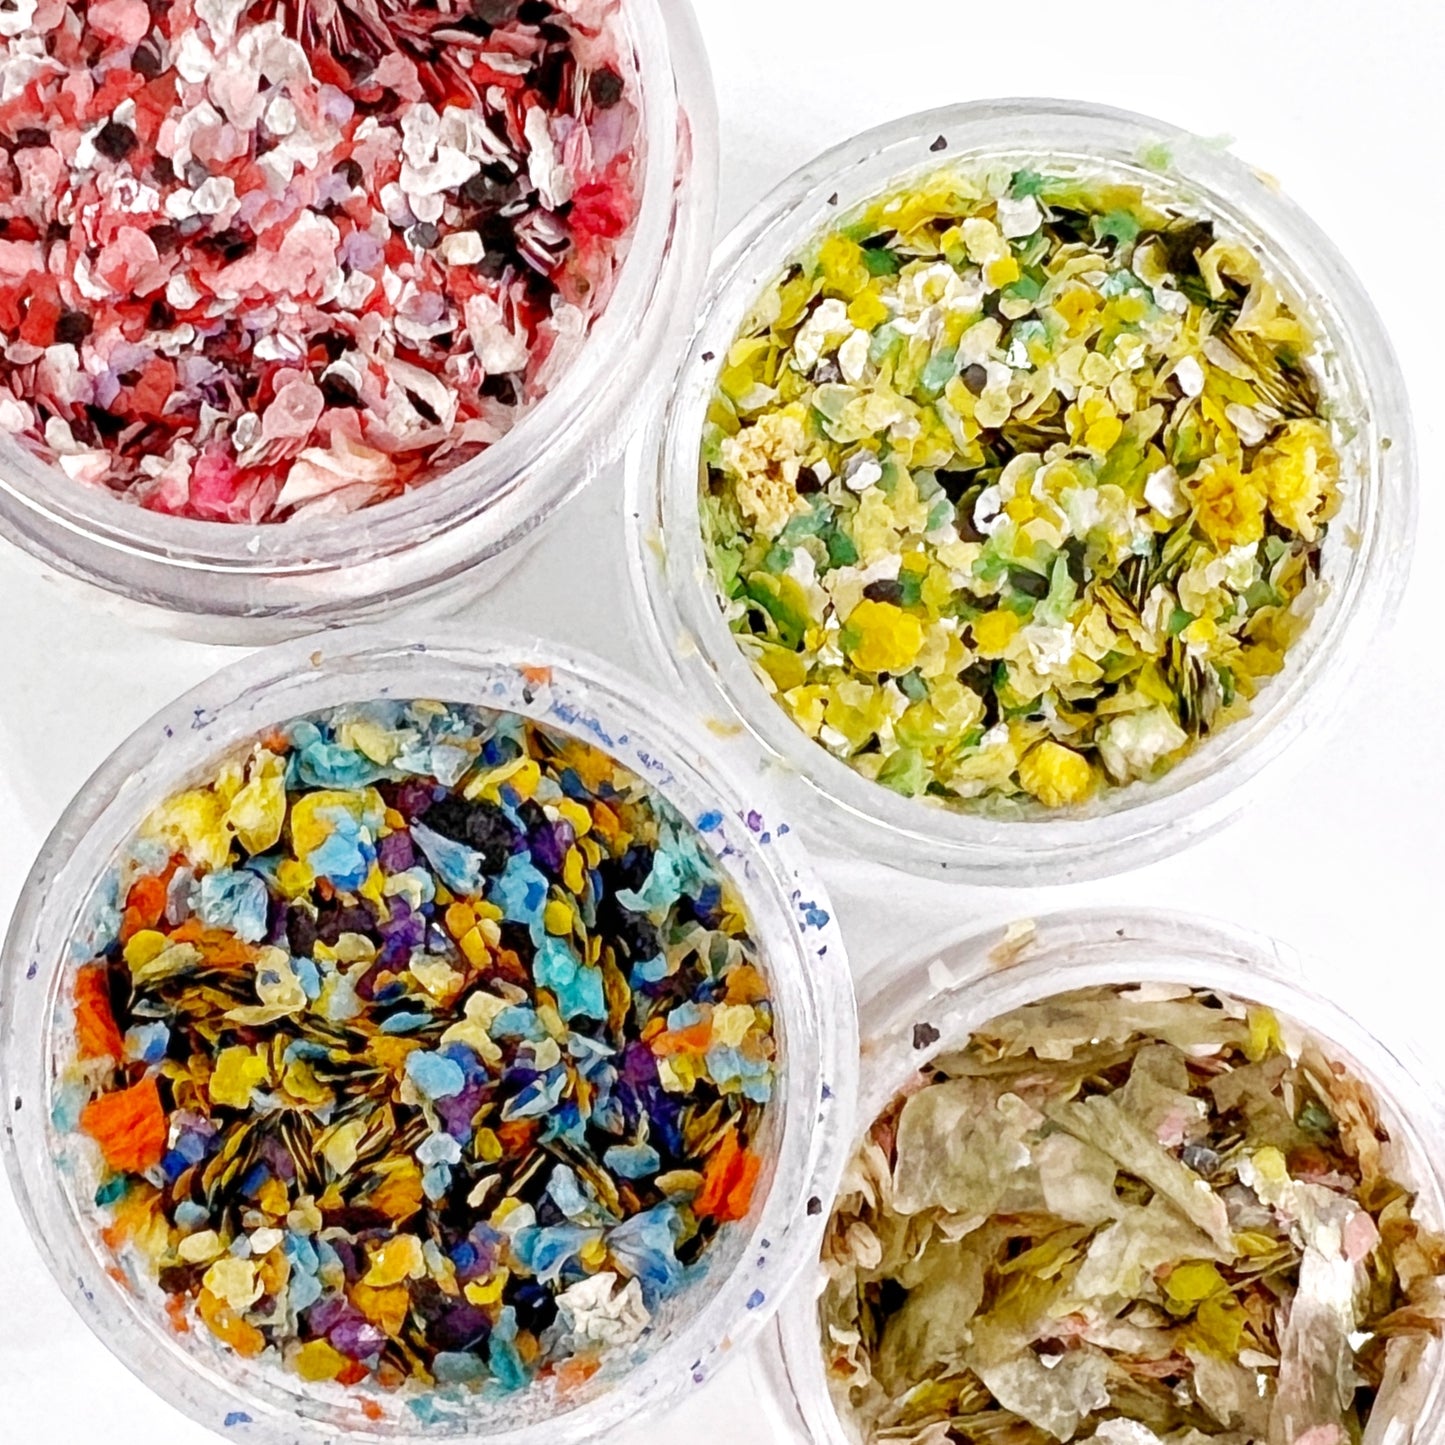 Confetti Collection - Colorful Mix of Mica Speckles and Dried Flower Petals in Jars, Ideal for Creating Unique Looks, Pictured from Above on White Background.